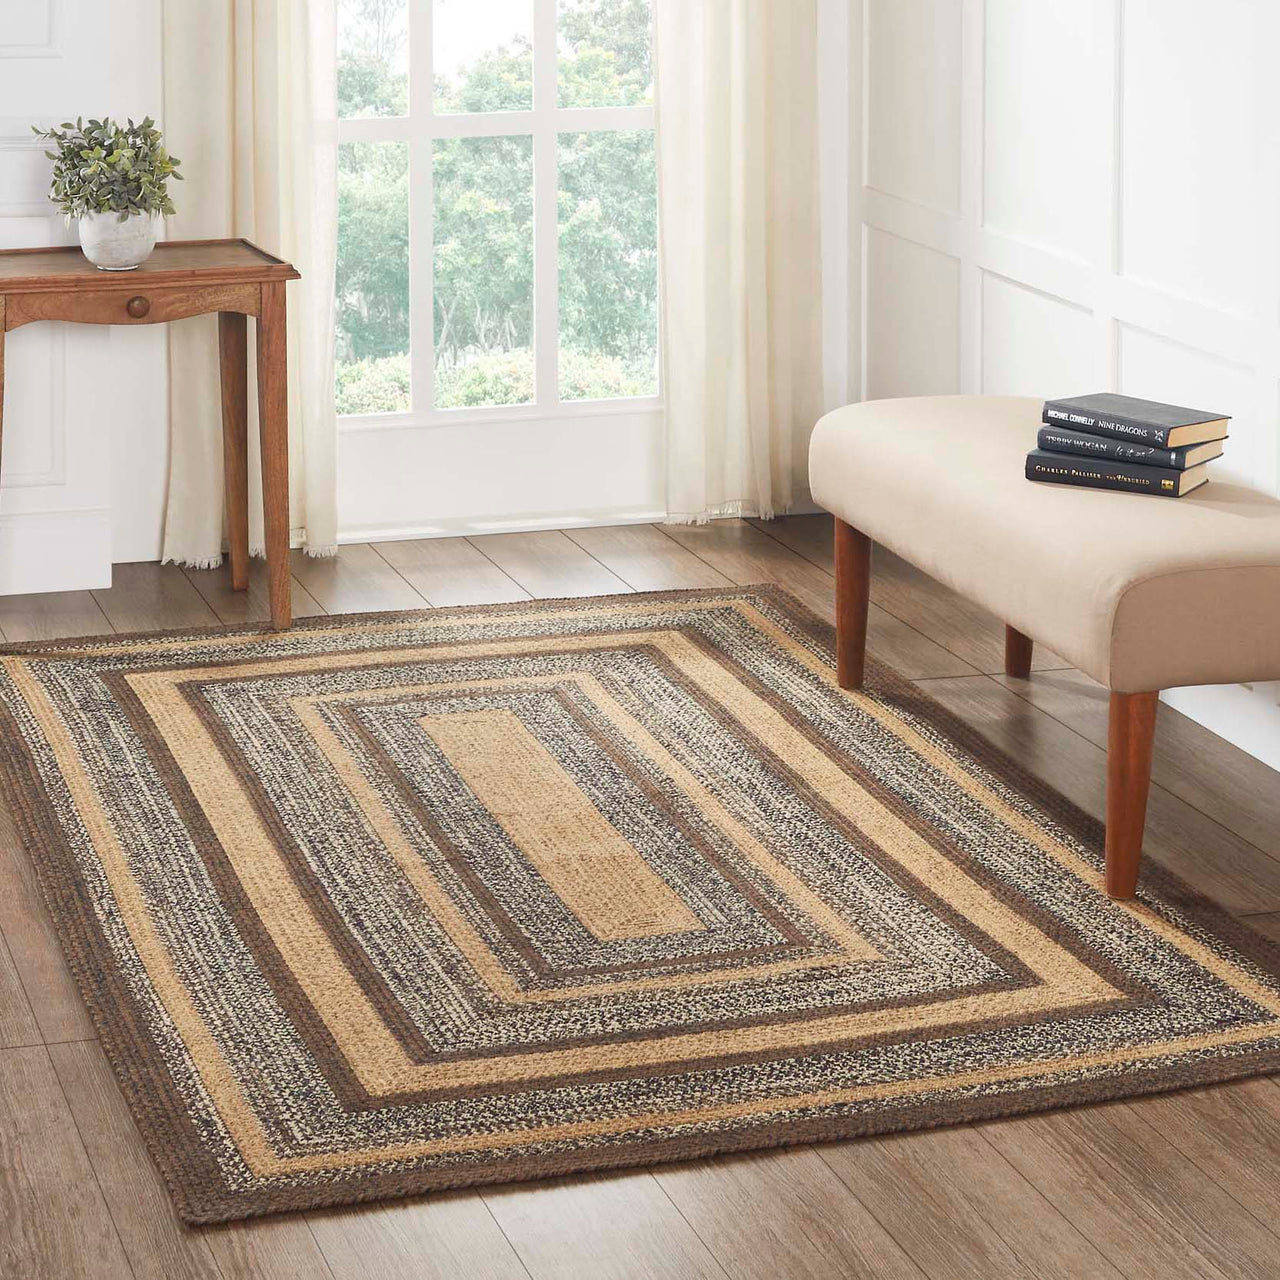 VHC Brands - Natural & Cream Jute Braided Area Rug - 60 x 96 Oval